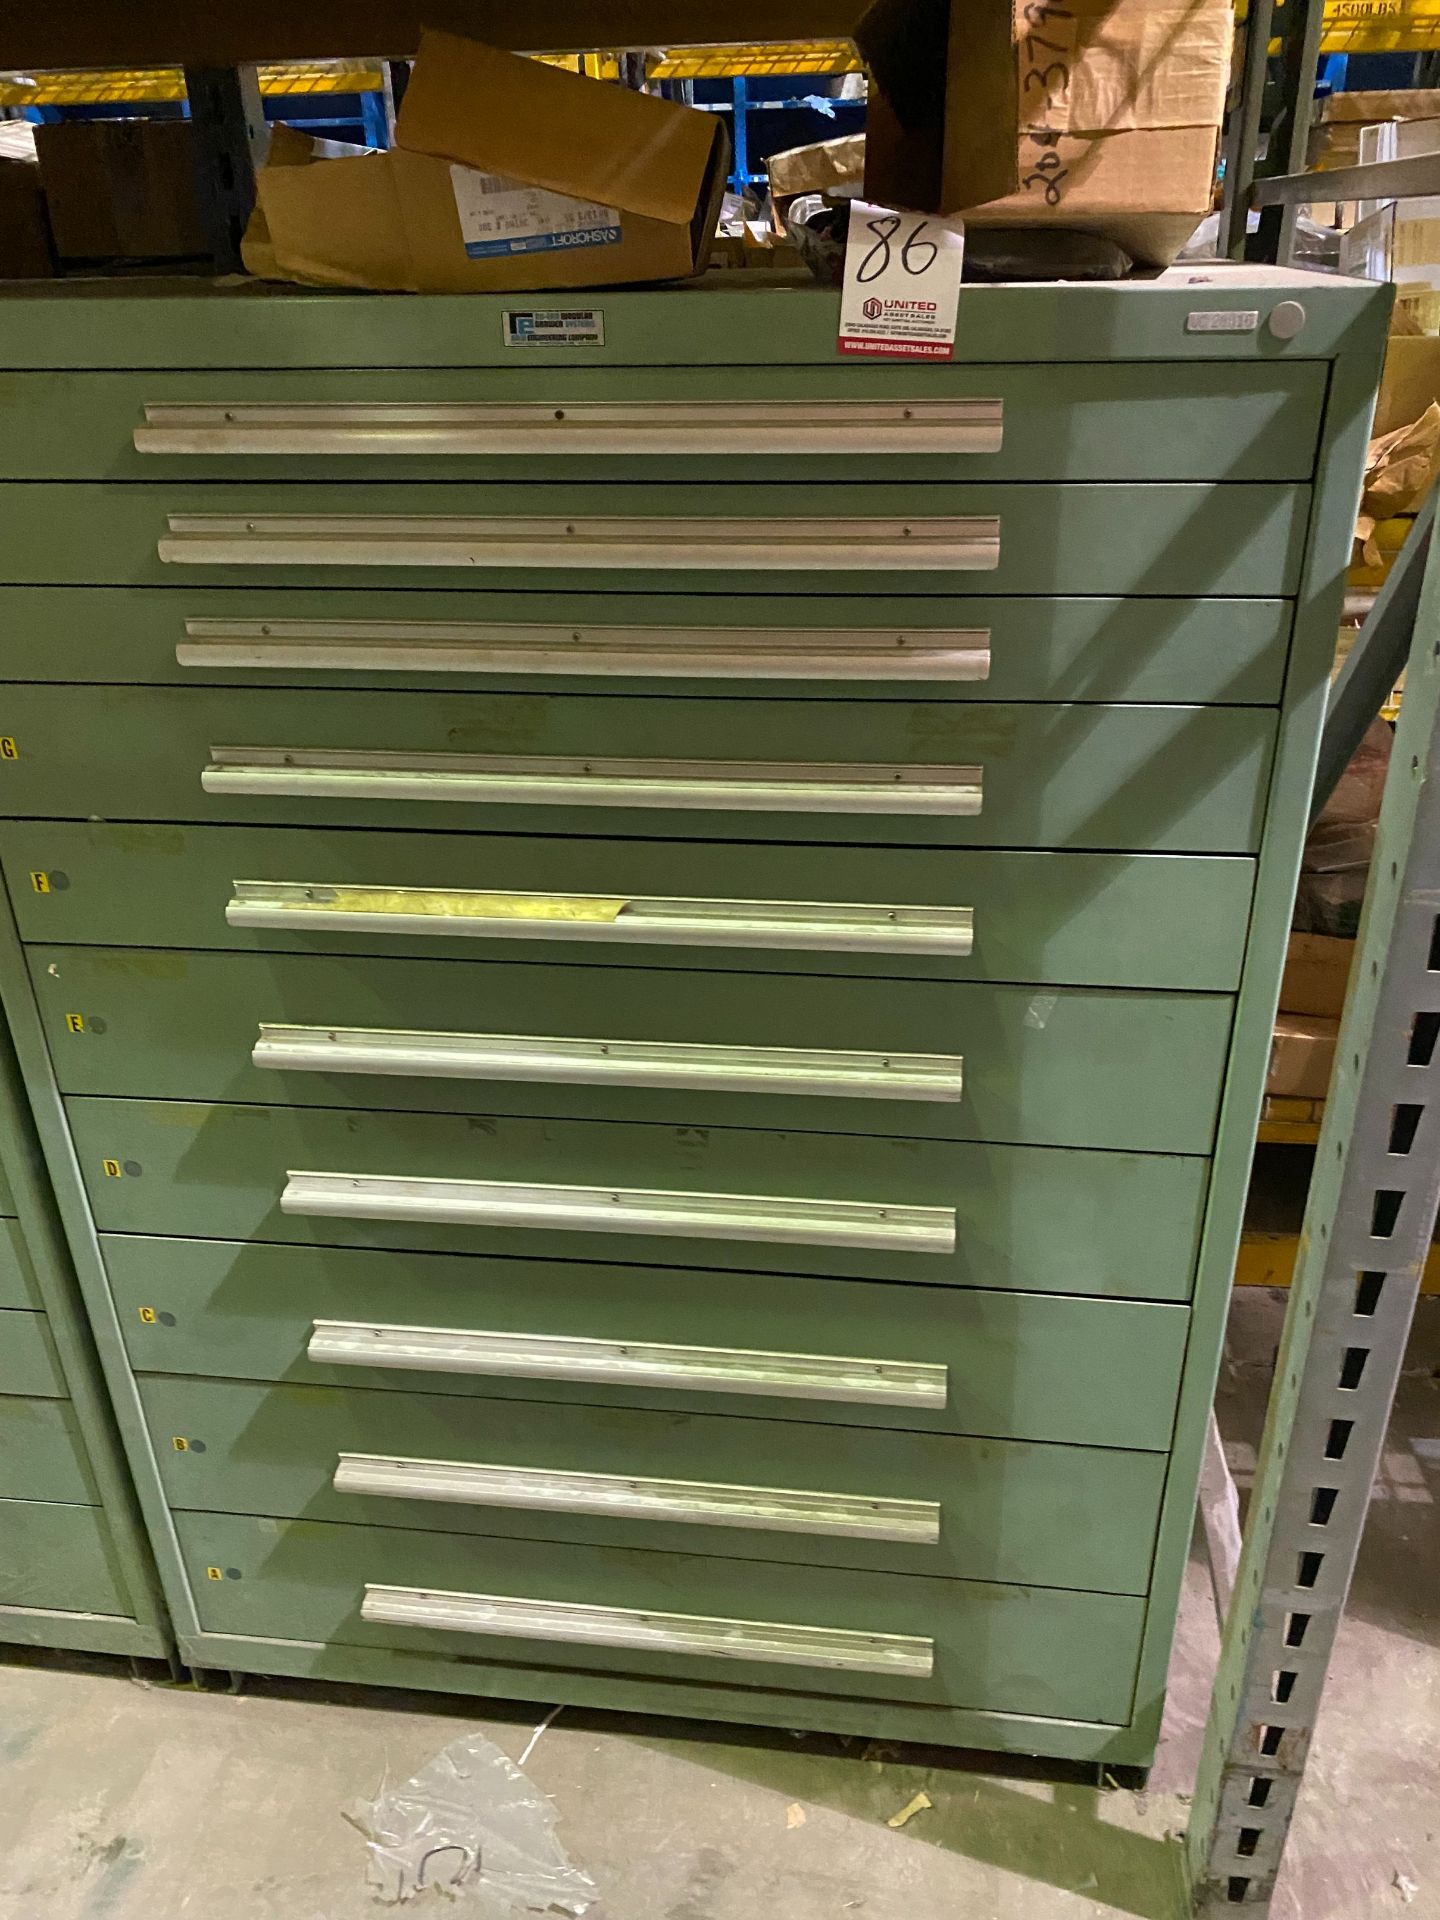 NU-ERA 45"W X 28"D X 60"T 10-DRAWER CABINET, WITH CONTENTS